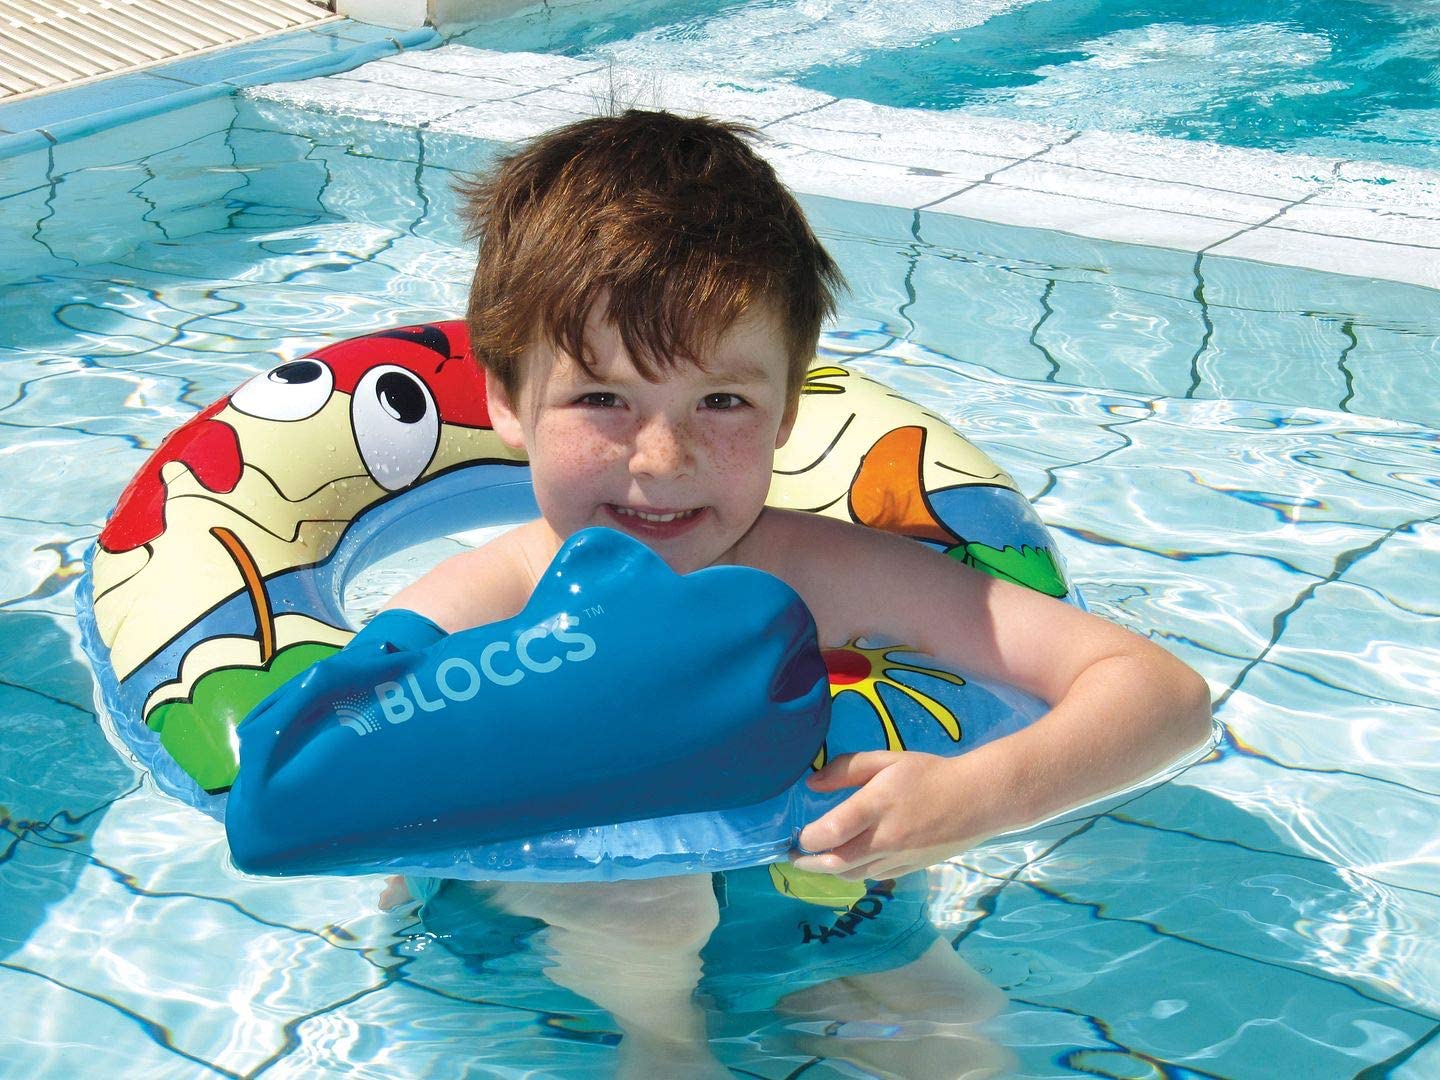 Bloccs Short waterproof arm protector for casts - #CSA71-S - Kids (S) blue S